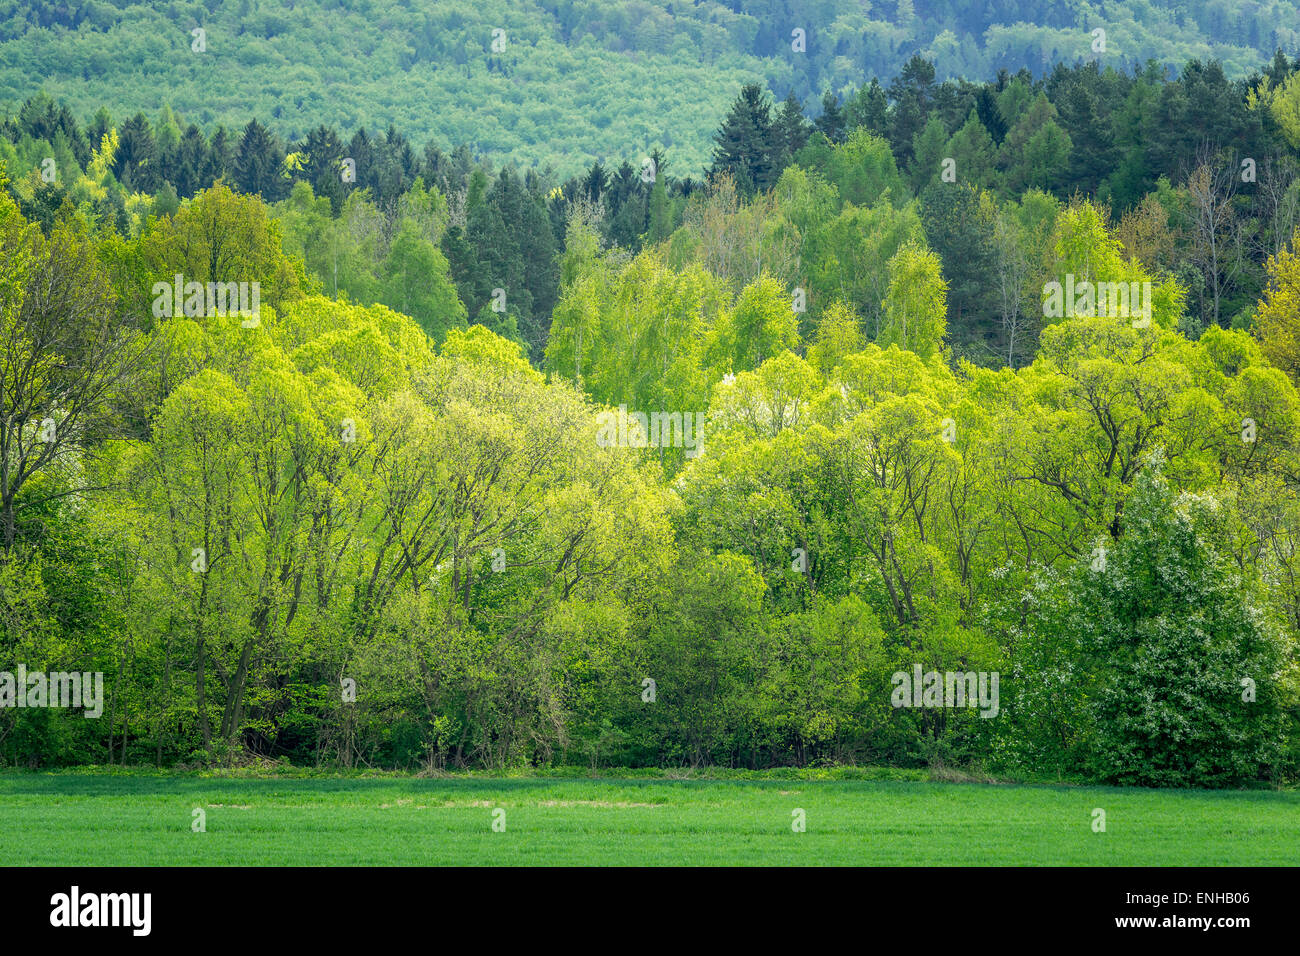 Spring forest with fresh spring greenery Stock Photo